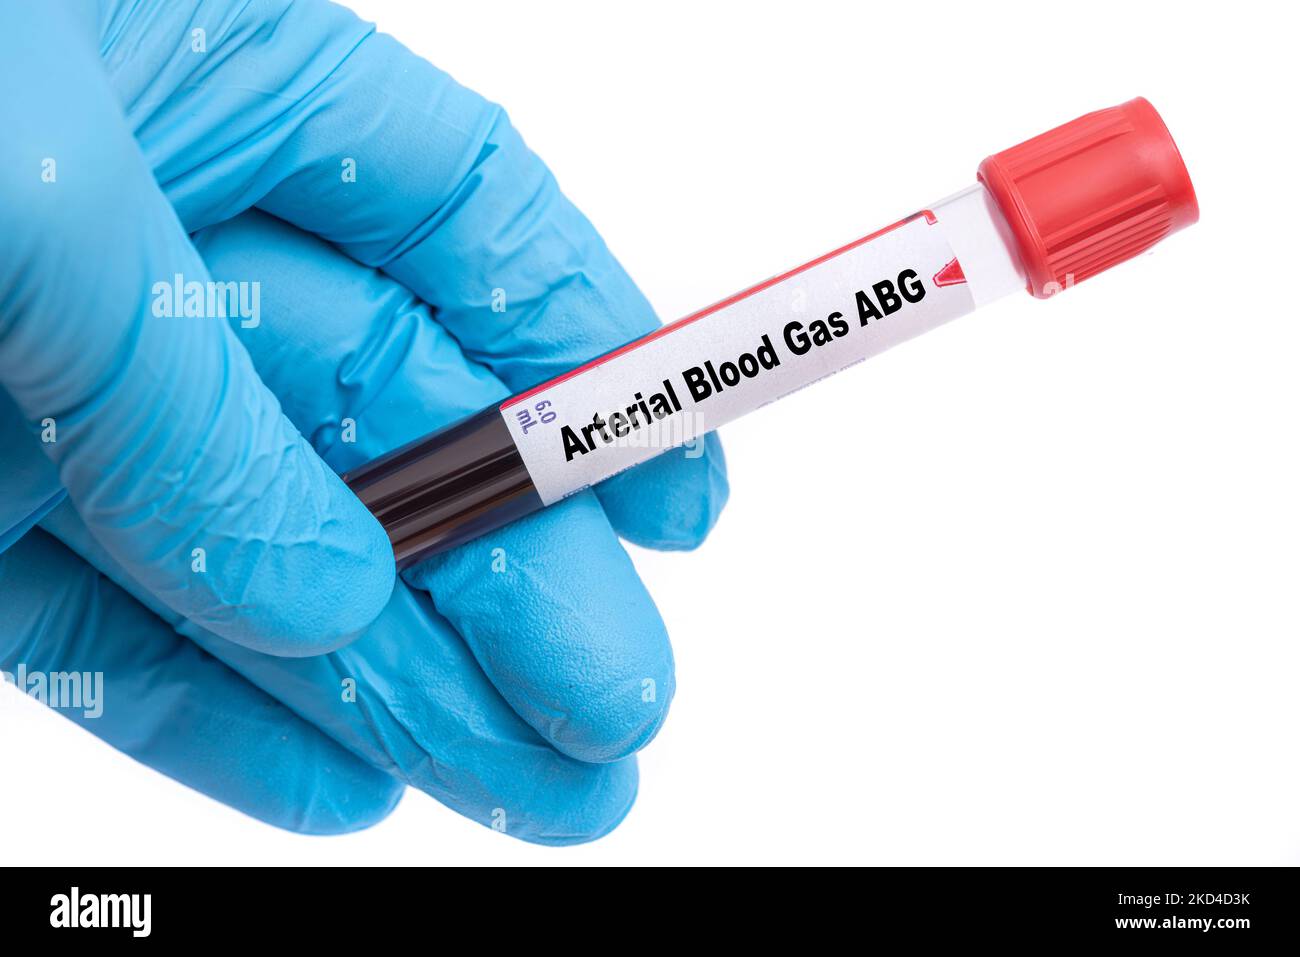 Arterial blood gas test, conceptual image Stock Photo